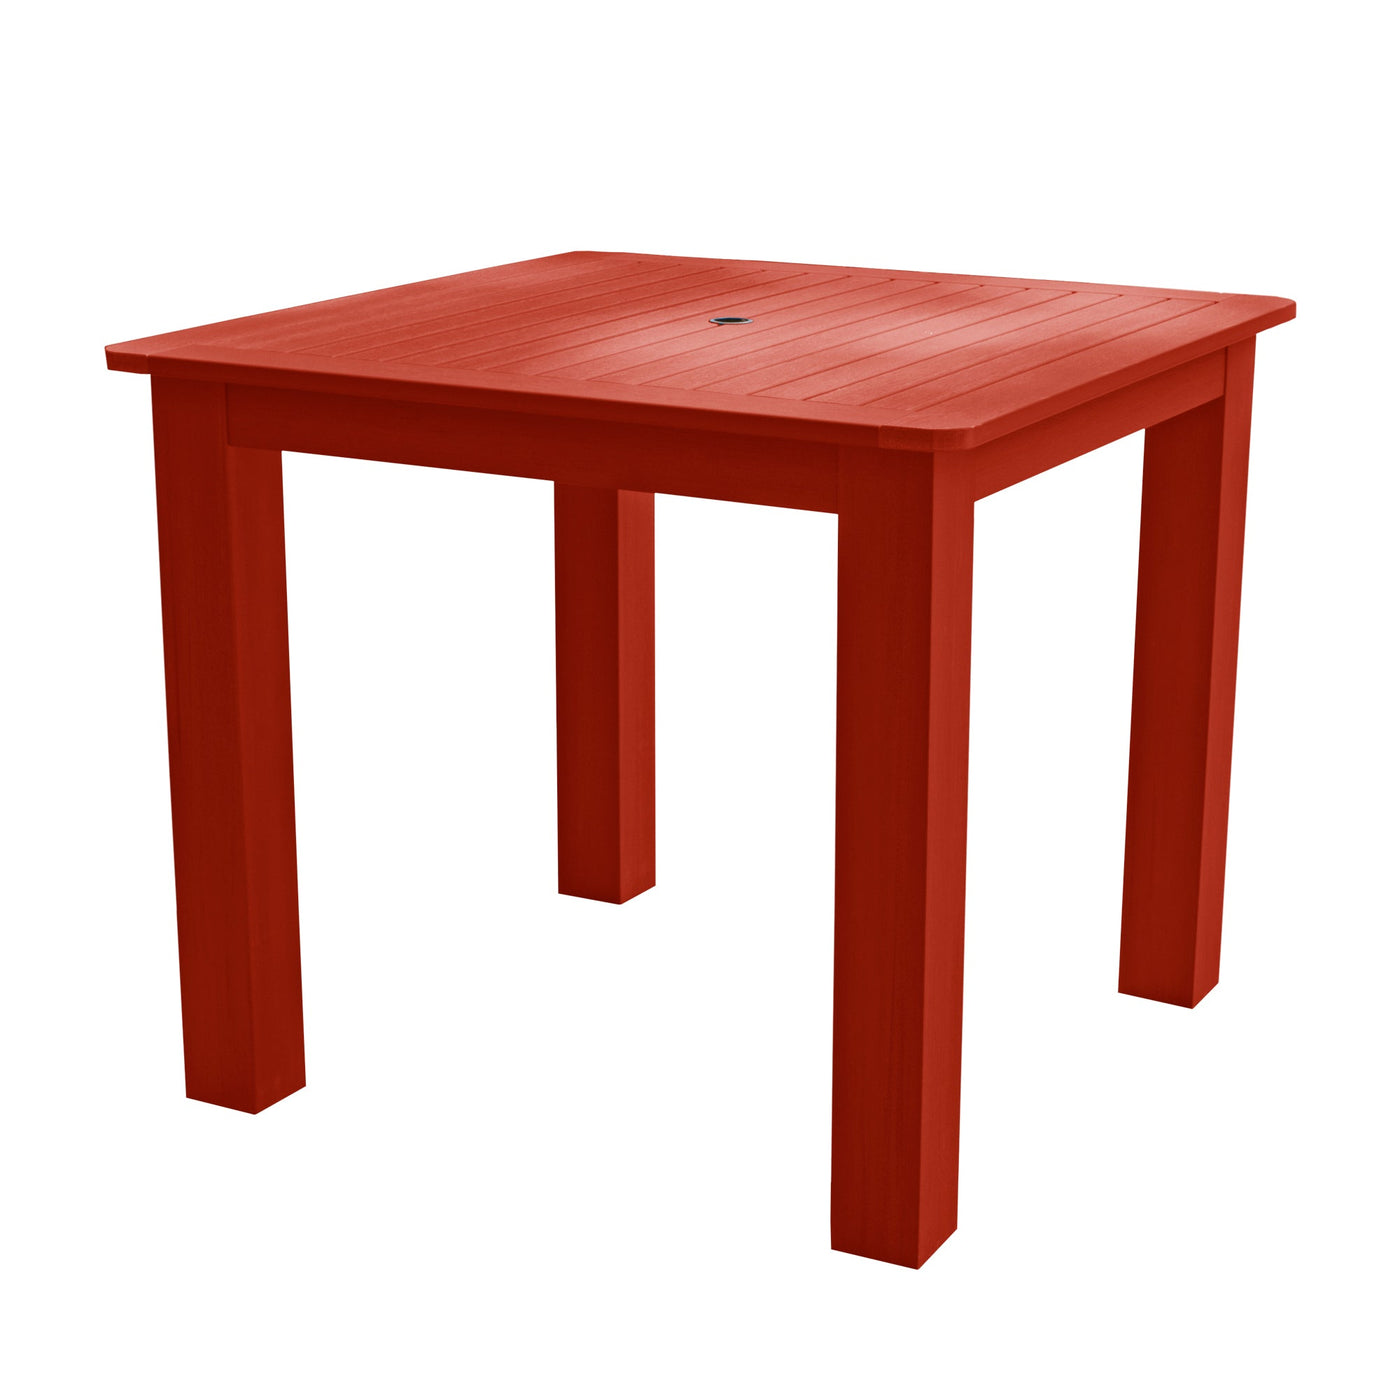 Square 42in x 42in Dining Table - Counter Height Dining Highwood USA Rustic Red 